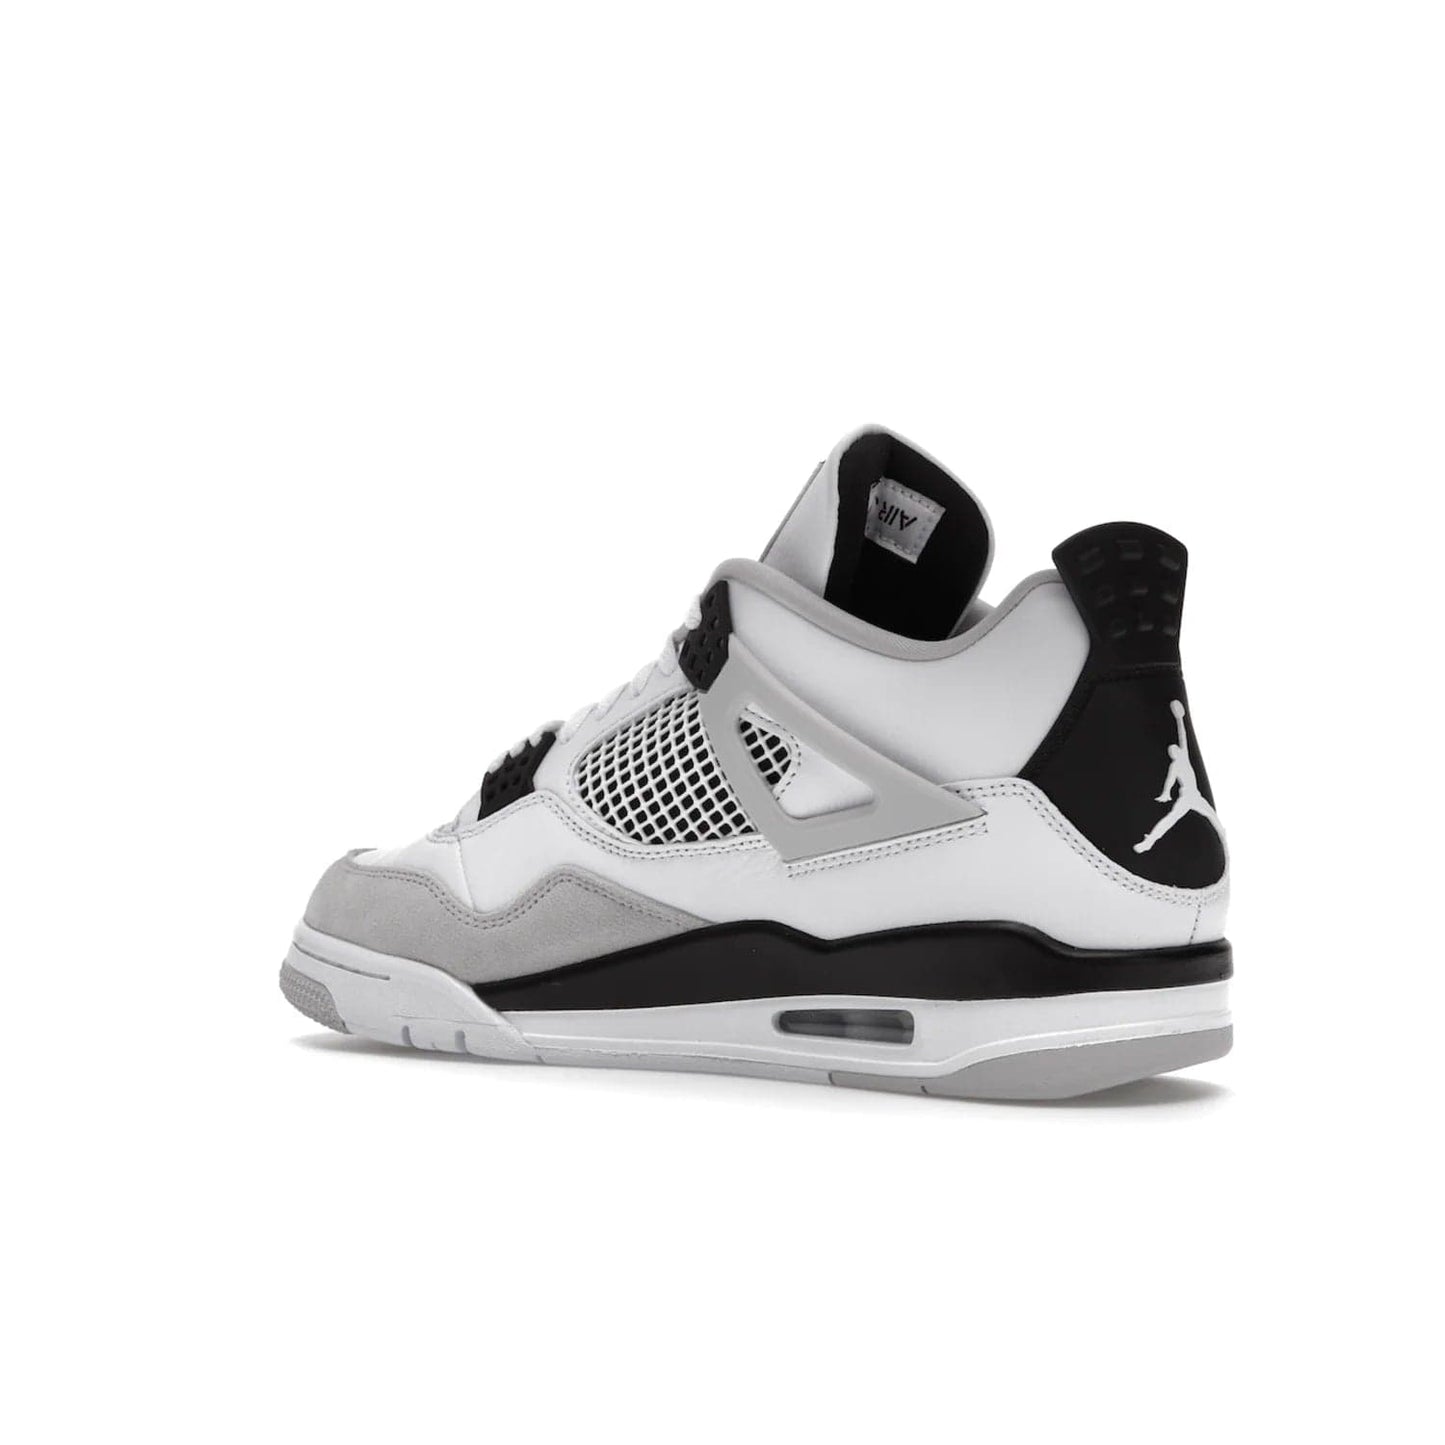 Jordan 4 Retro Military Black - Image 23 - Only at www.BallersClubKickz.com - Updated Air Jordan 4 style with a white/black/light grey sole and visible Air unit. Released in May 2022, offering timeless classic style and comfort.